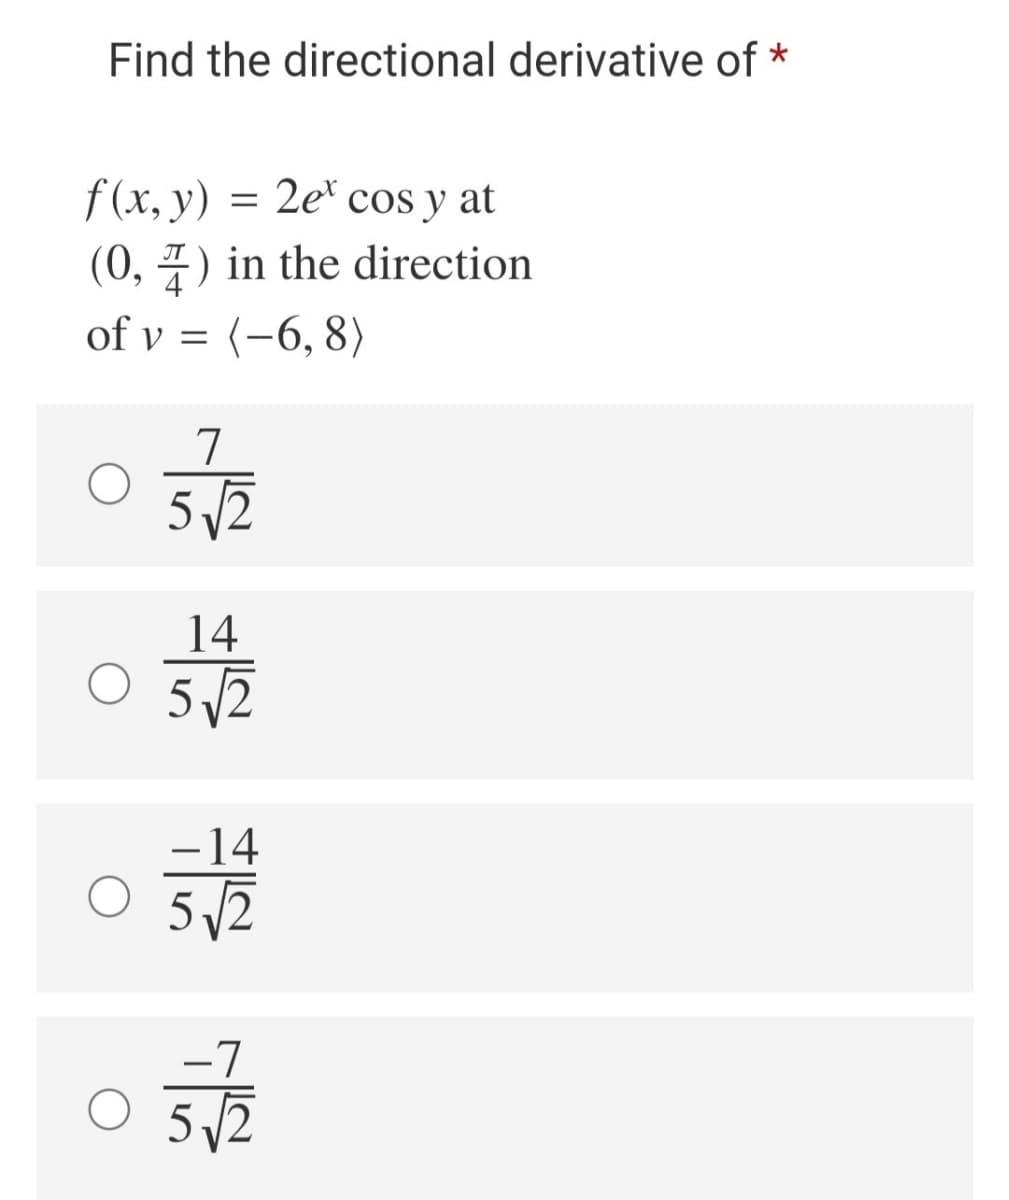 Find the directional derivative of *
f(x, y)
= 2e* cos y at
(0, 7) in the direction
of v = (-6, 8)
7
5 12
14
512
-14
5 2
-7
5 12
